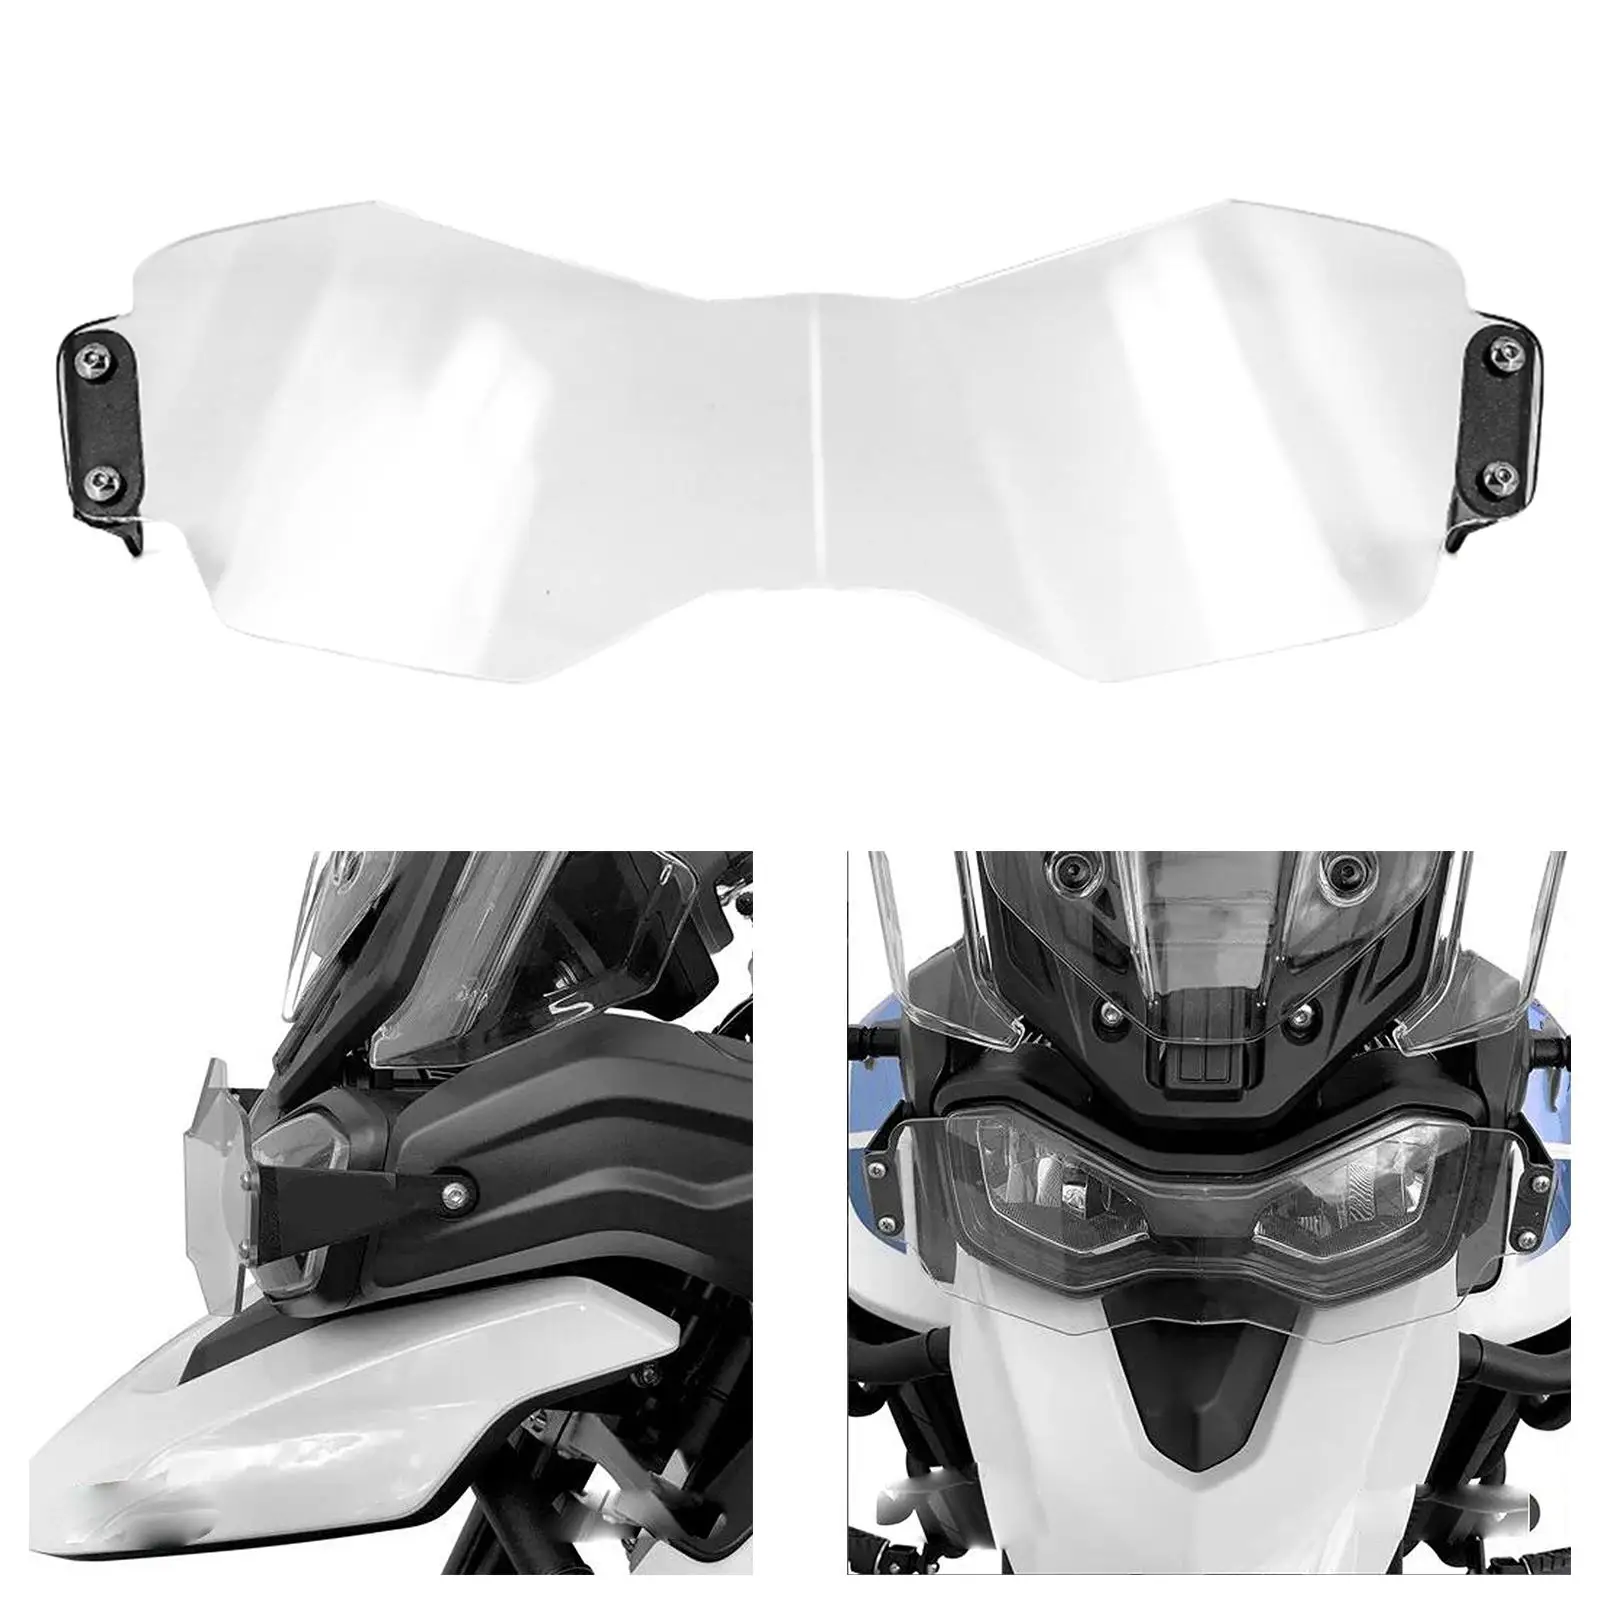 Acrylic Motorcycle Headlight Protector Guard Cover Fits for  900 20-22